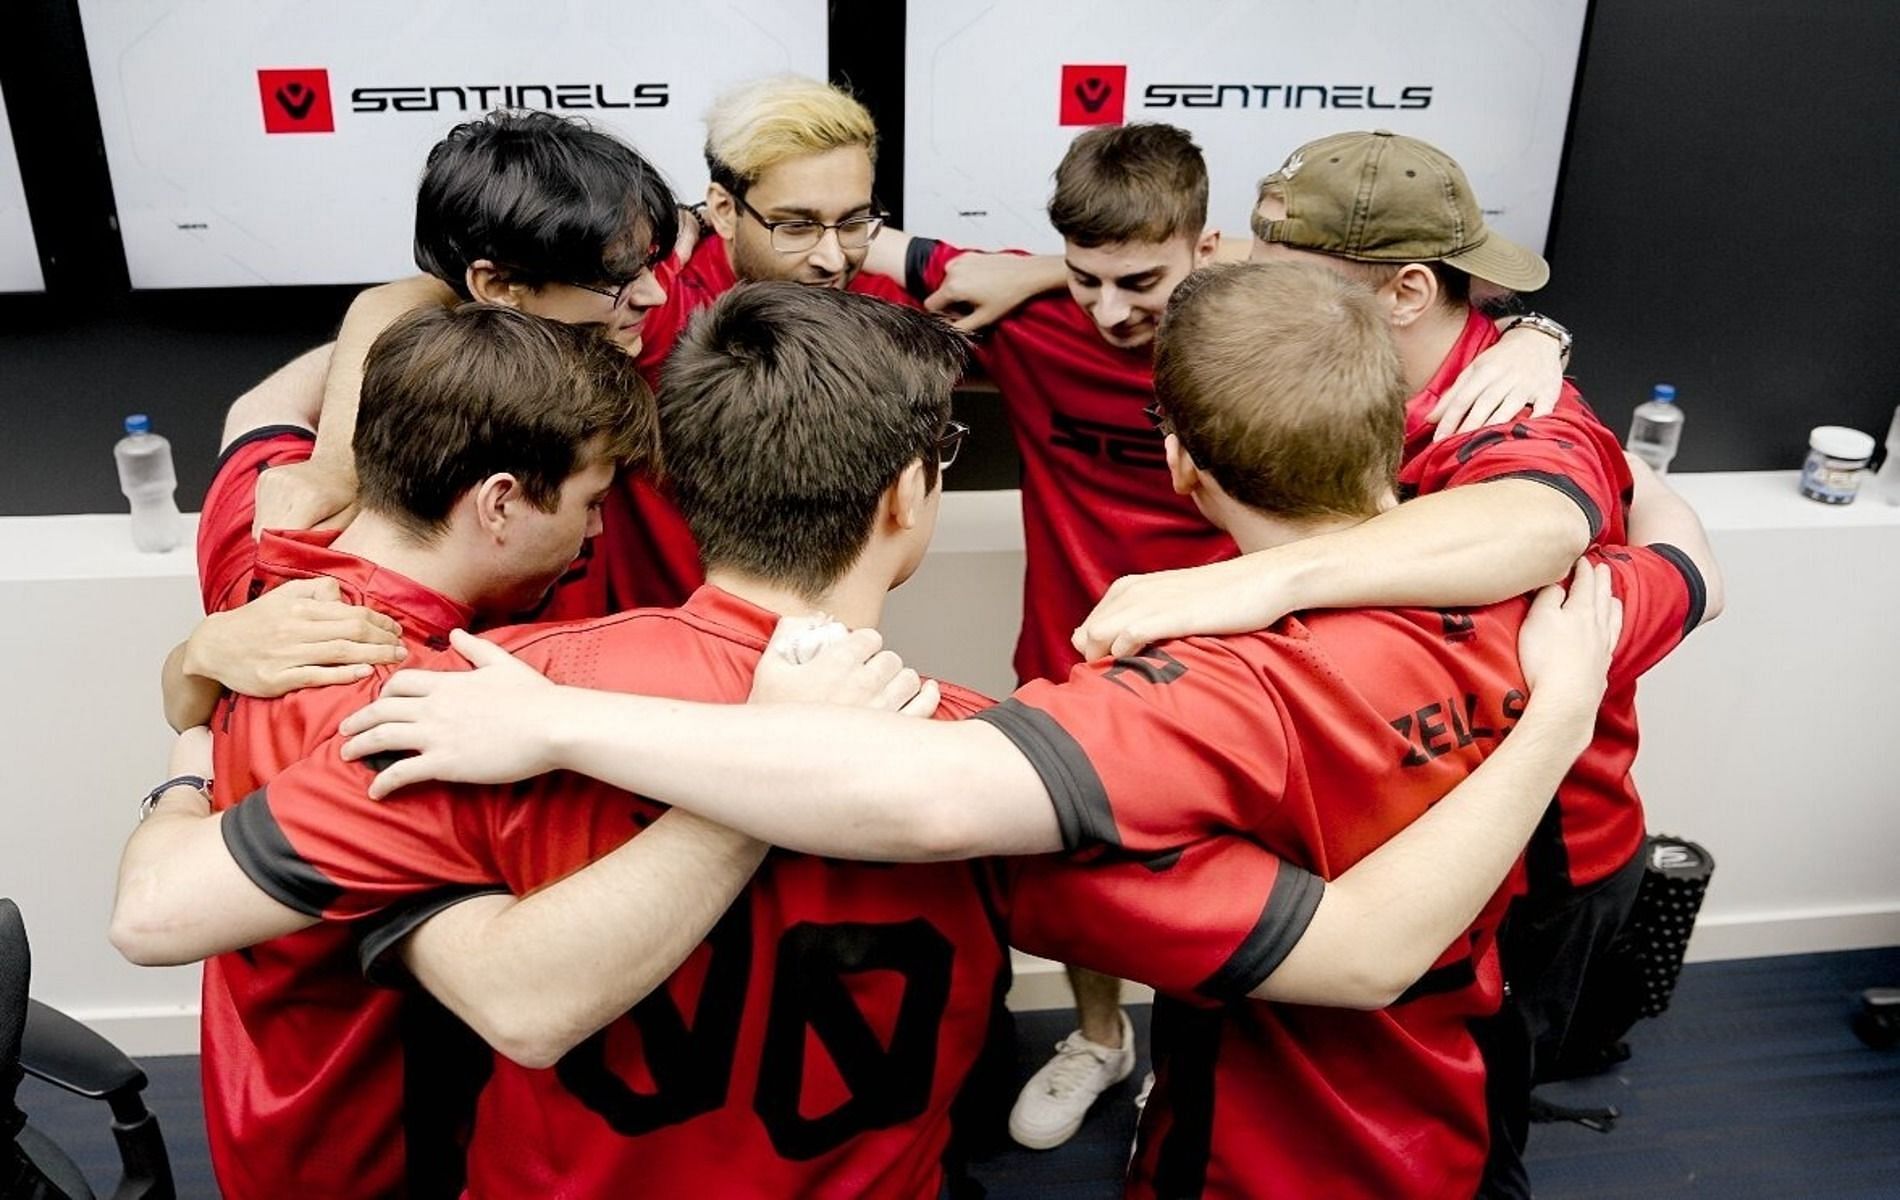 Sentinels lost to 100 Thieves in Lower Quarterfinals at VCT LCQ (Image via Twitter/ @Sentinels)